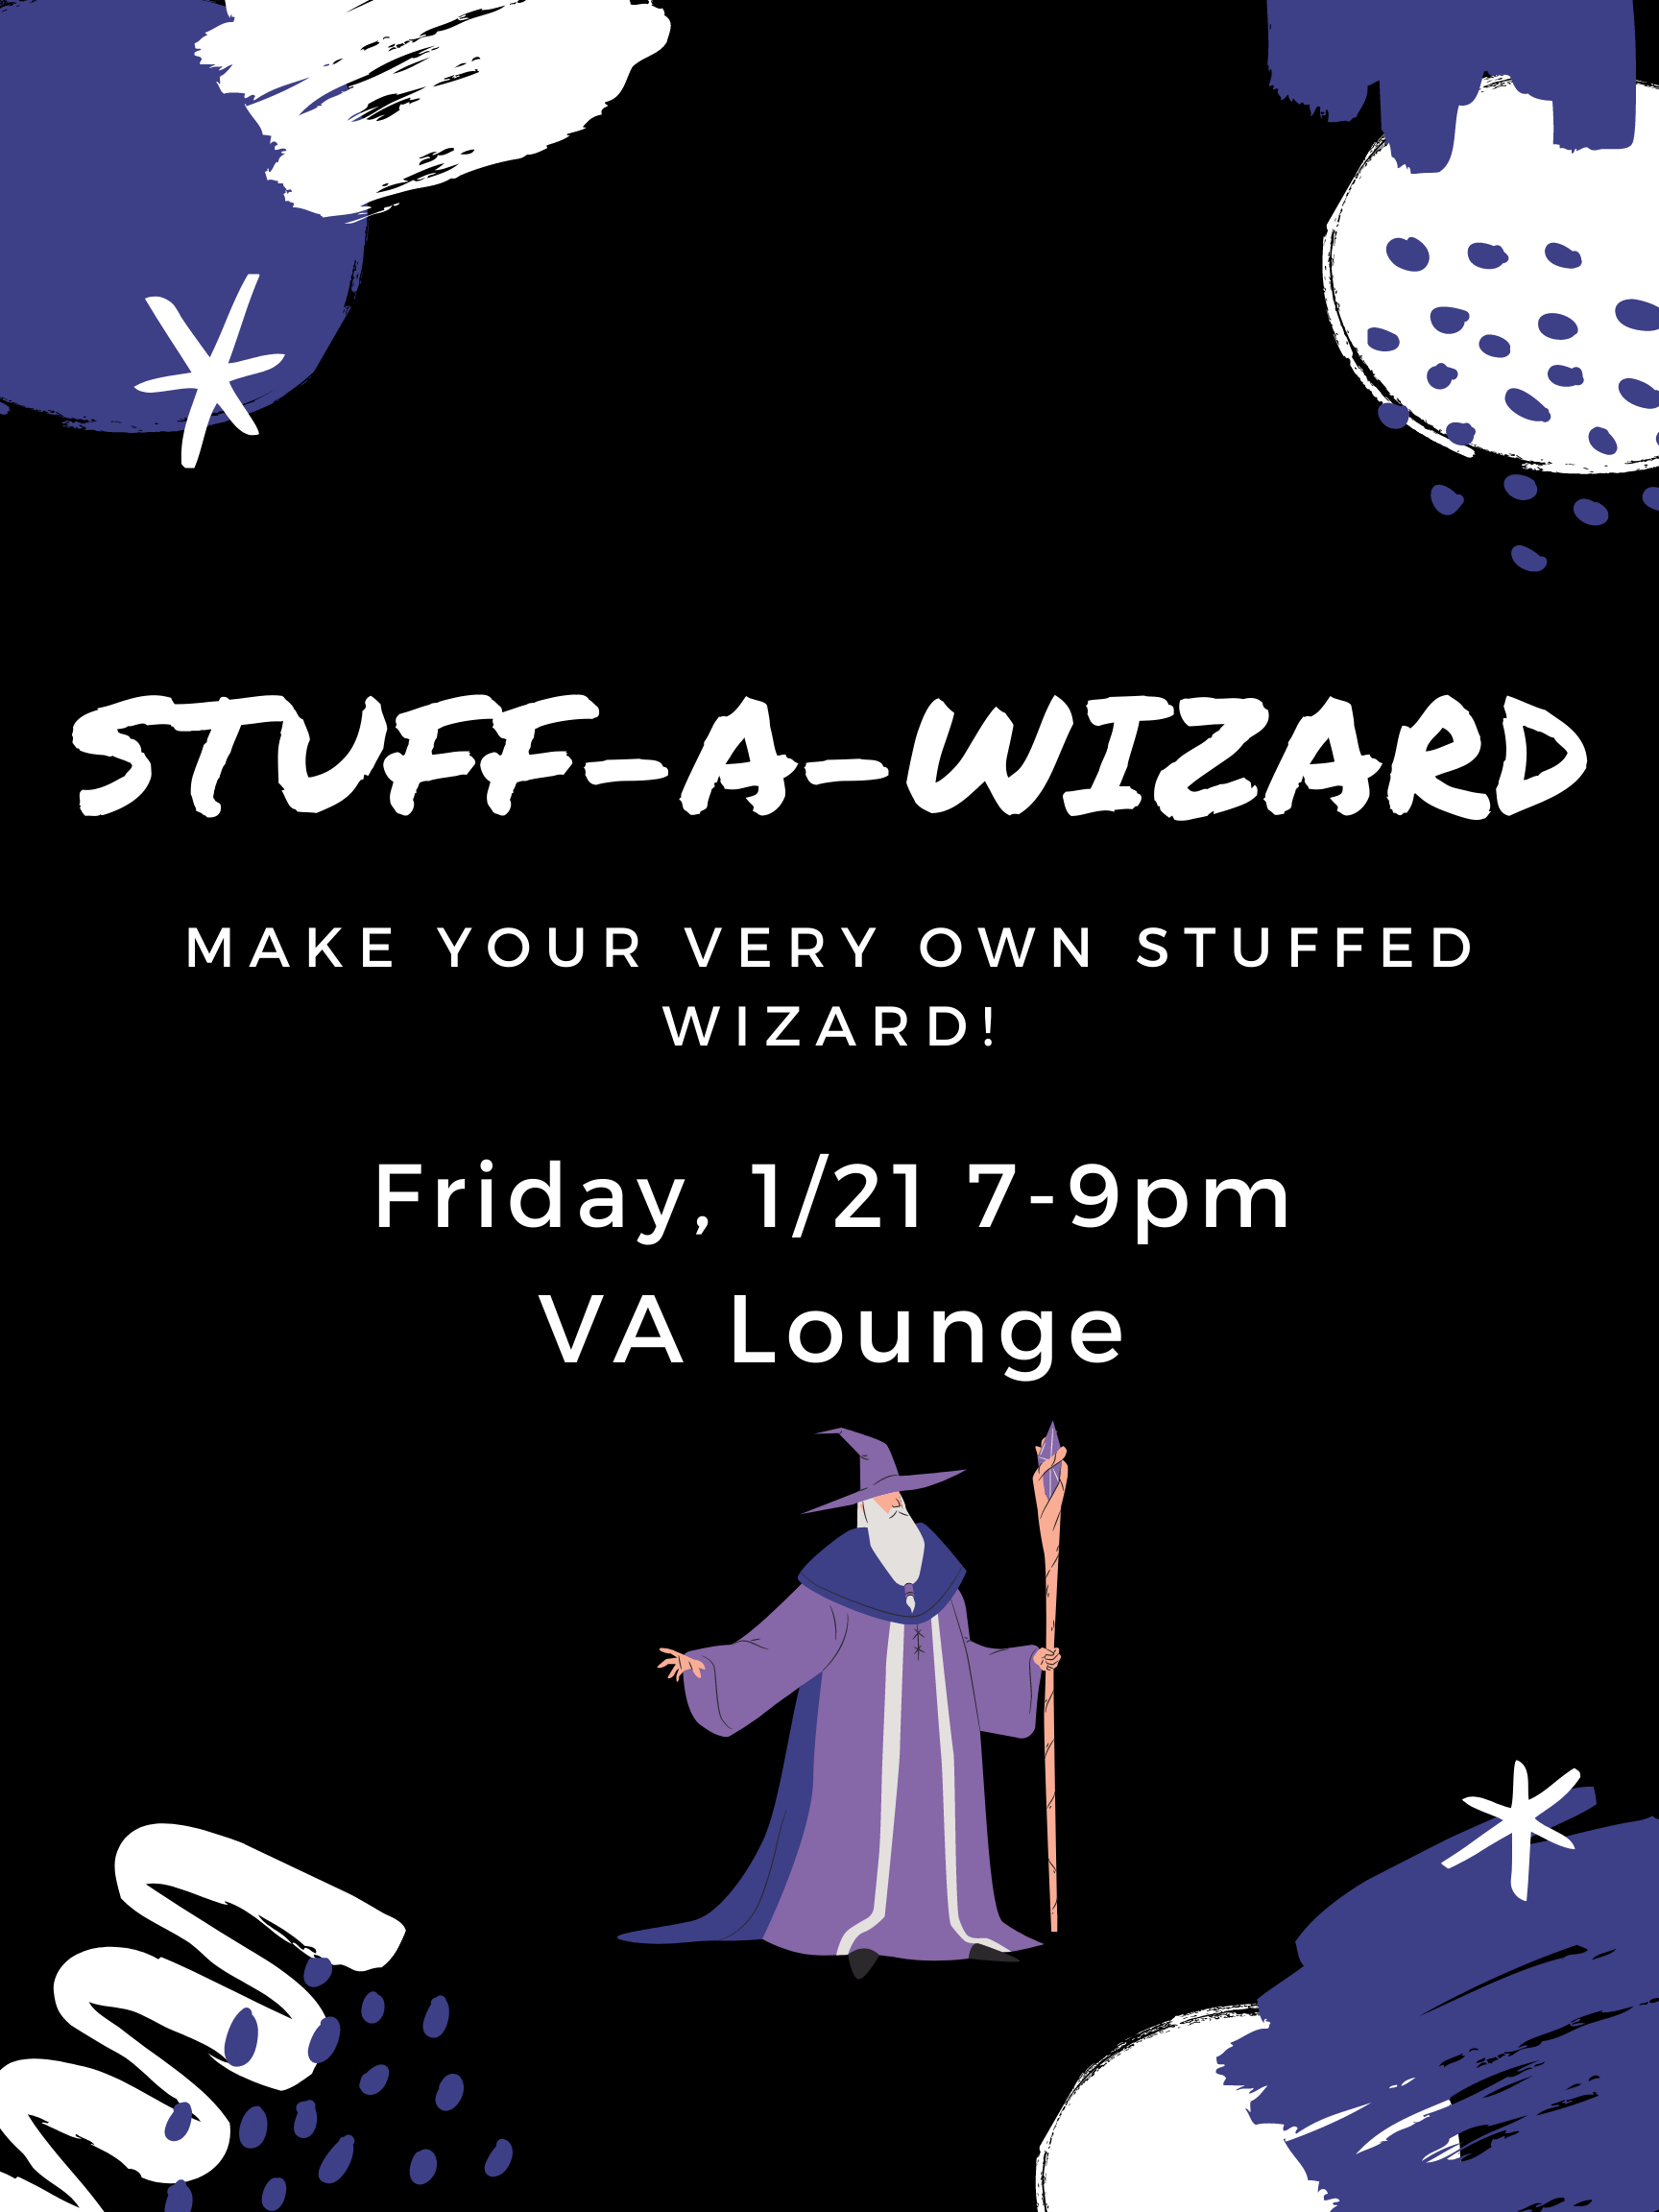 Make Your Very Own Stuffed Wizard!